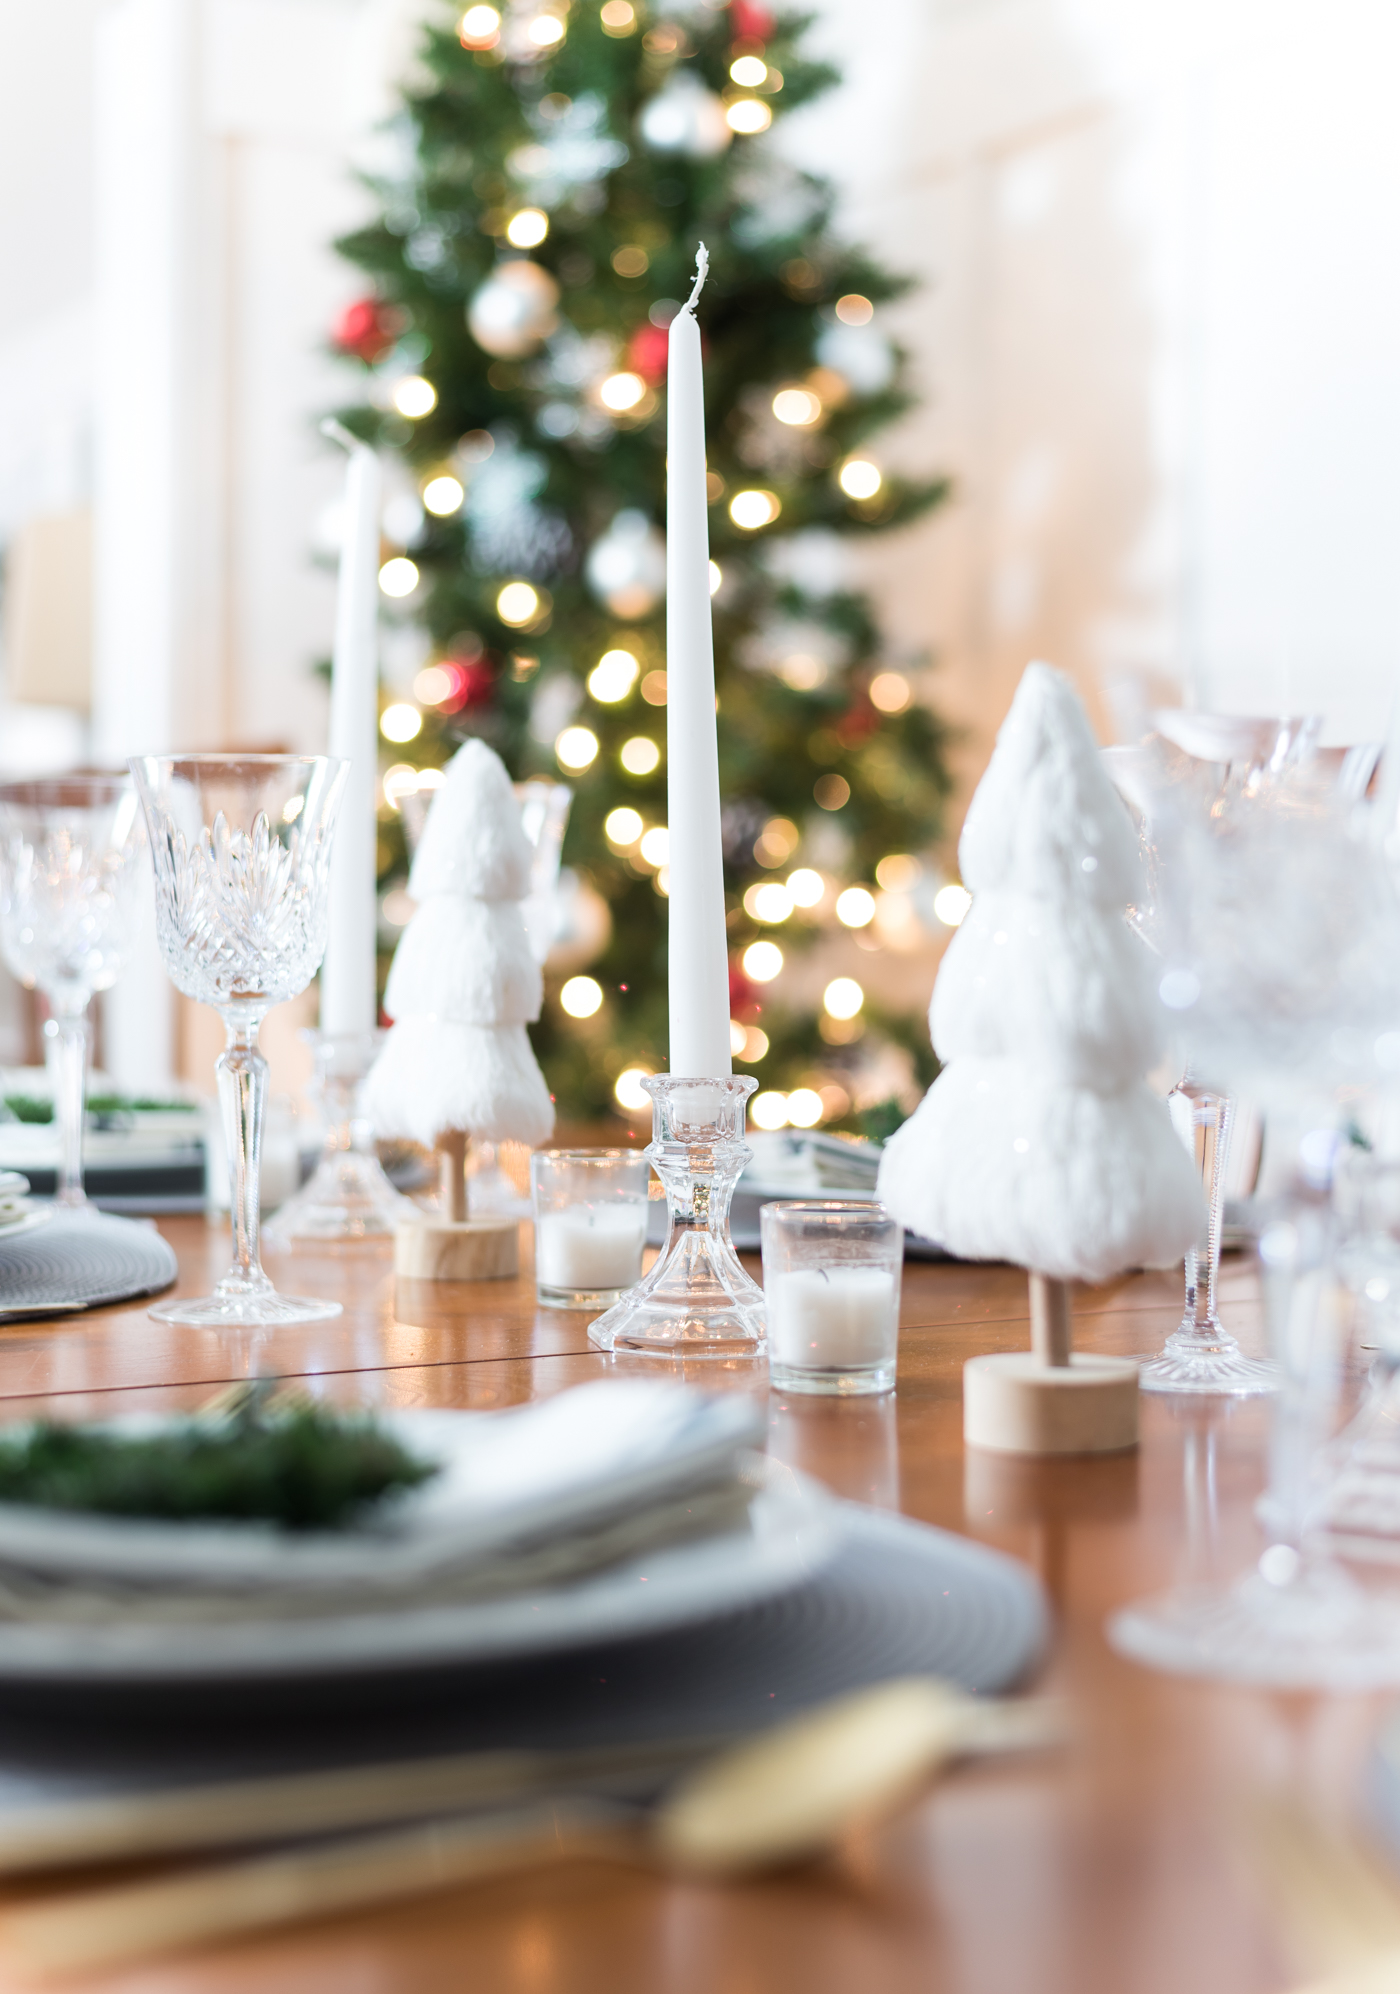 Simple holiday centerpiece ideas in gray, white